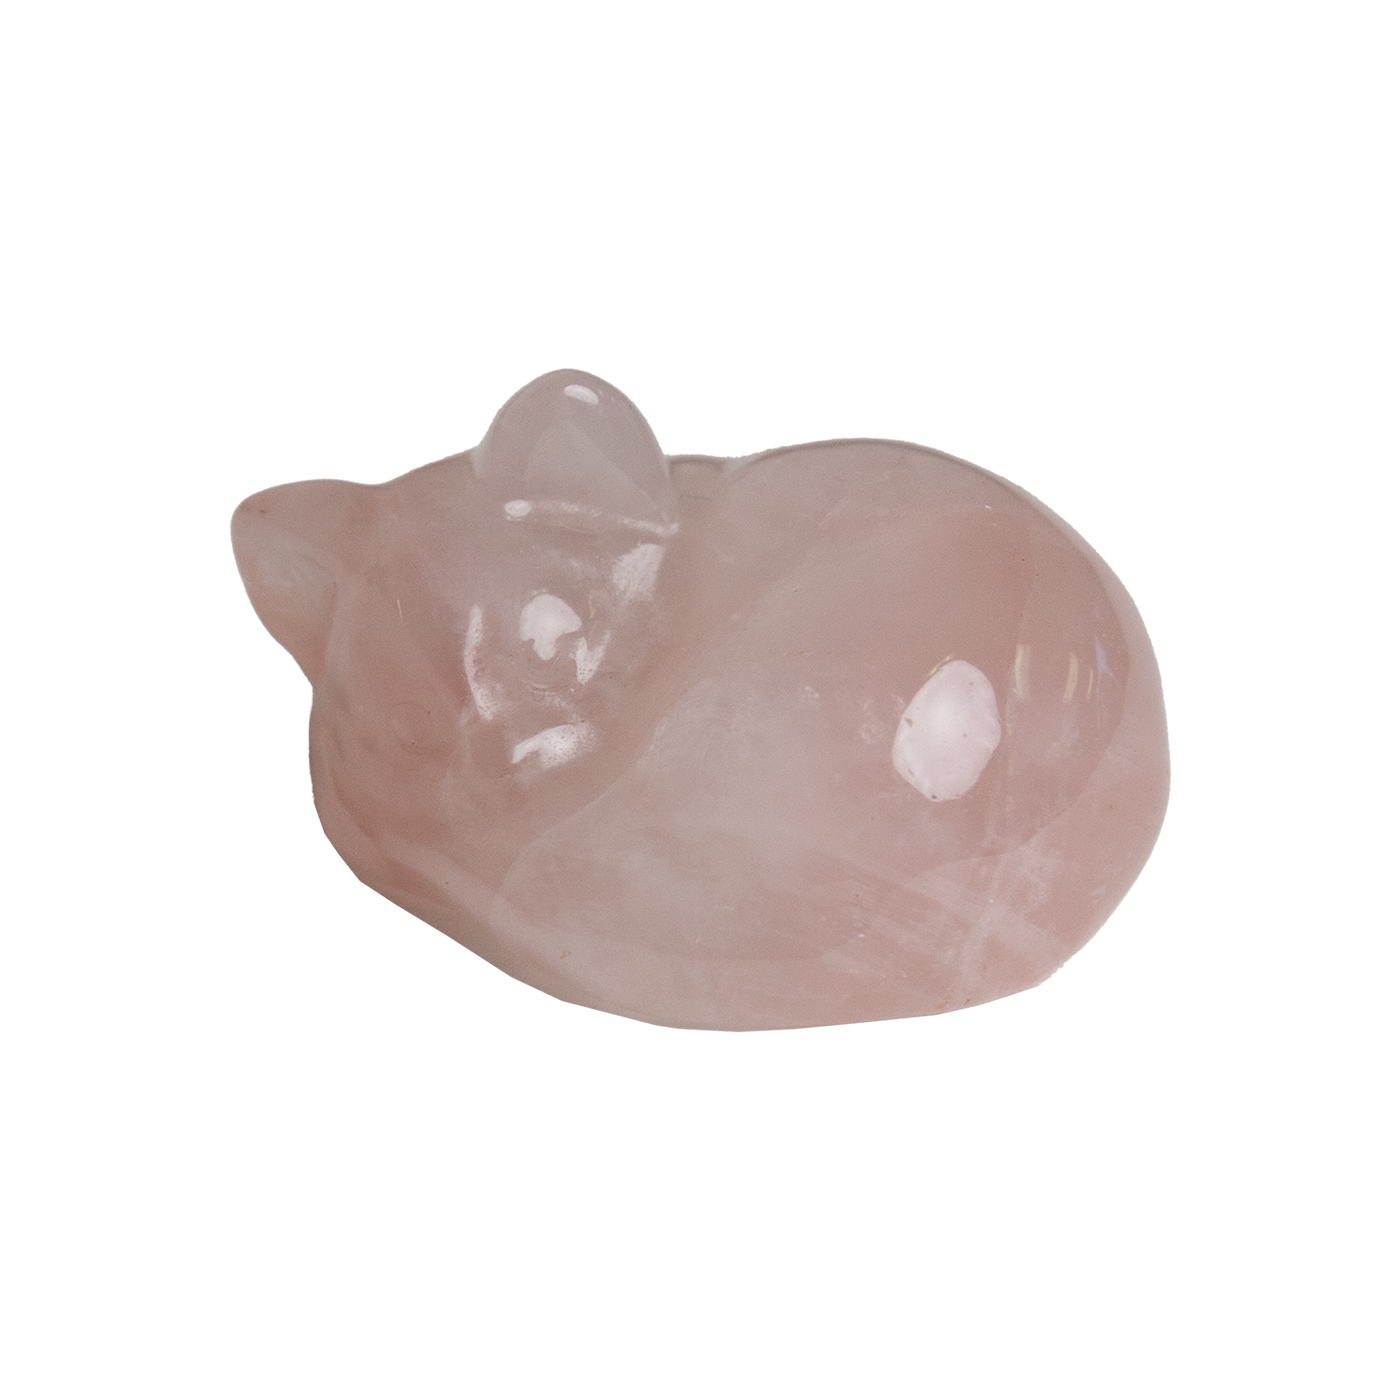 product view of rose quartz curled cat crystal carving by Energy Muse